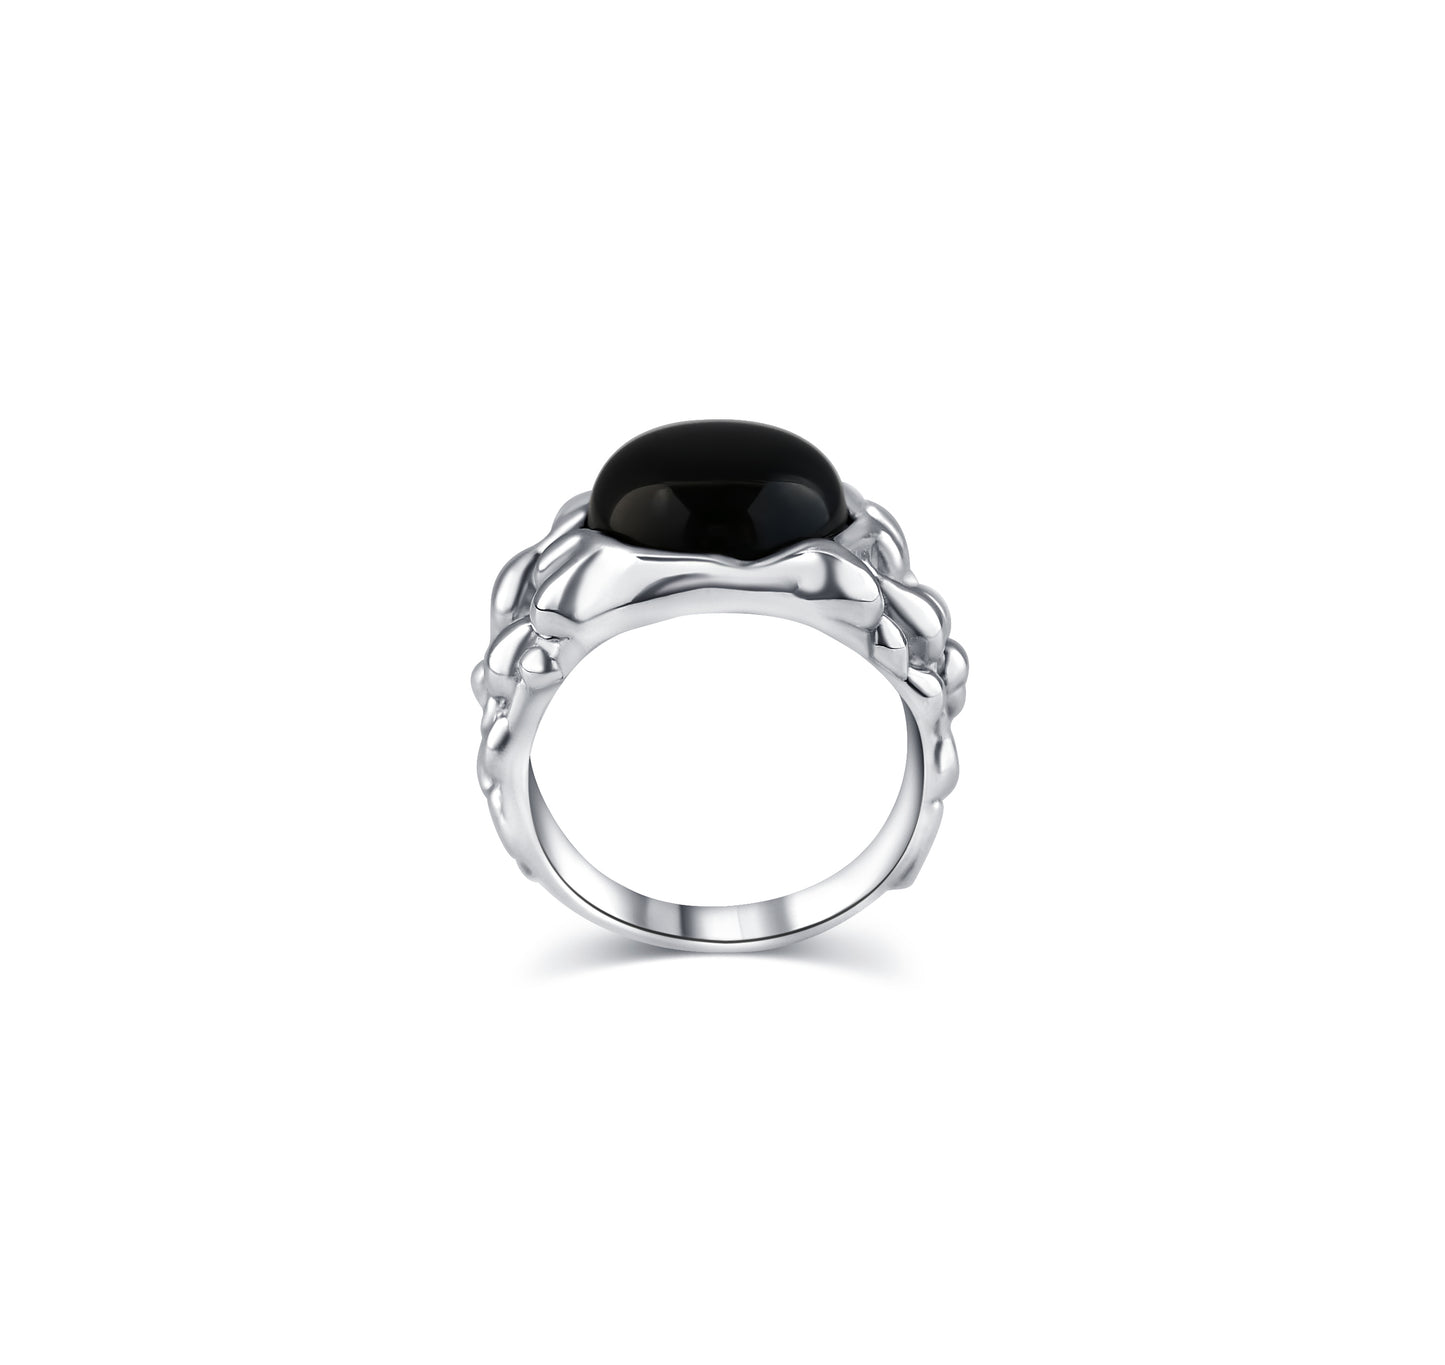 The Molten Stone Ring